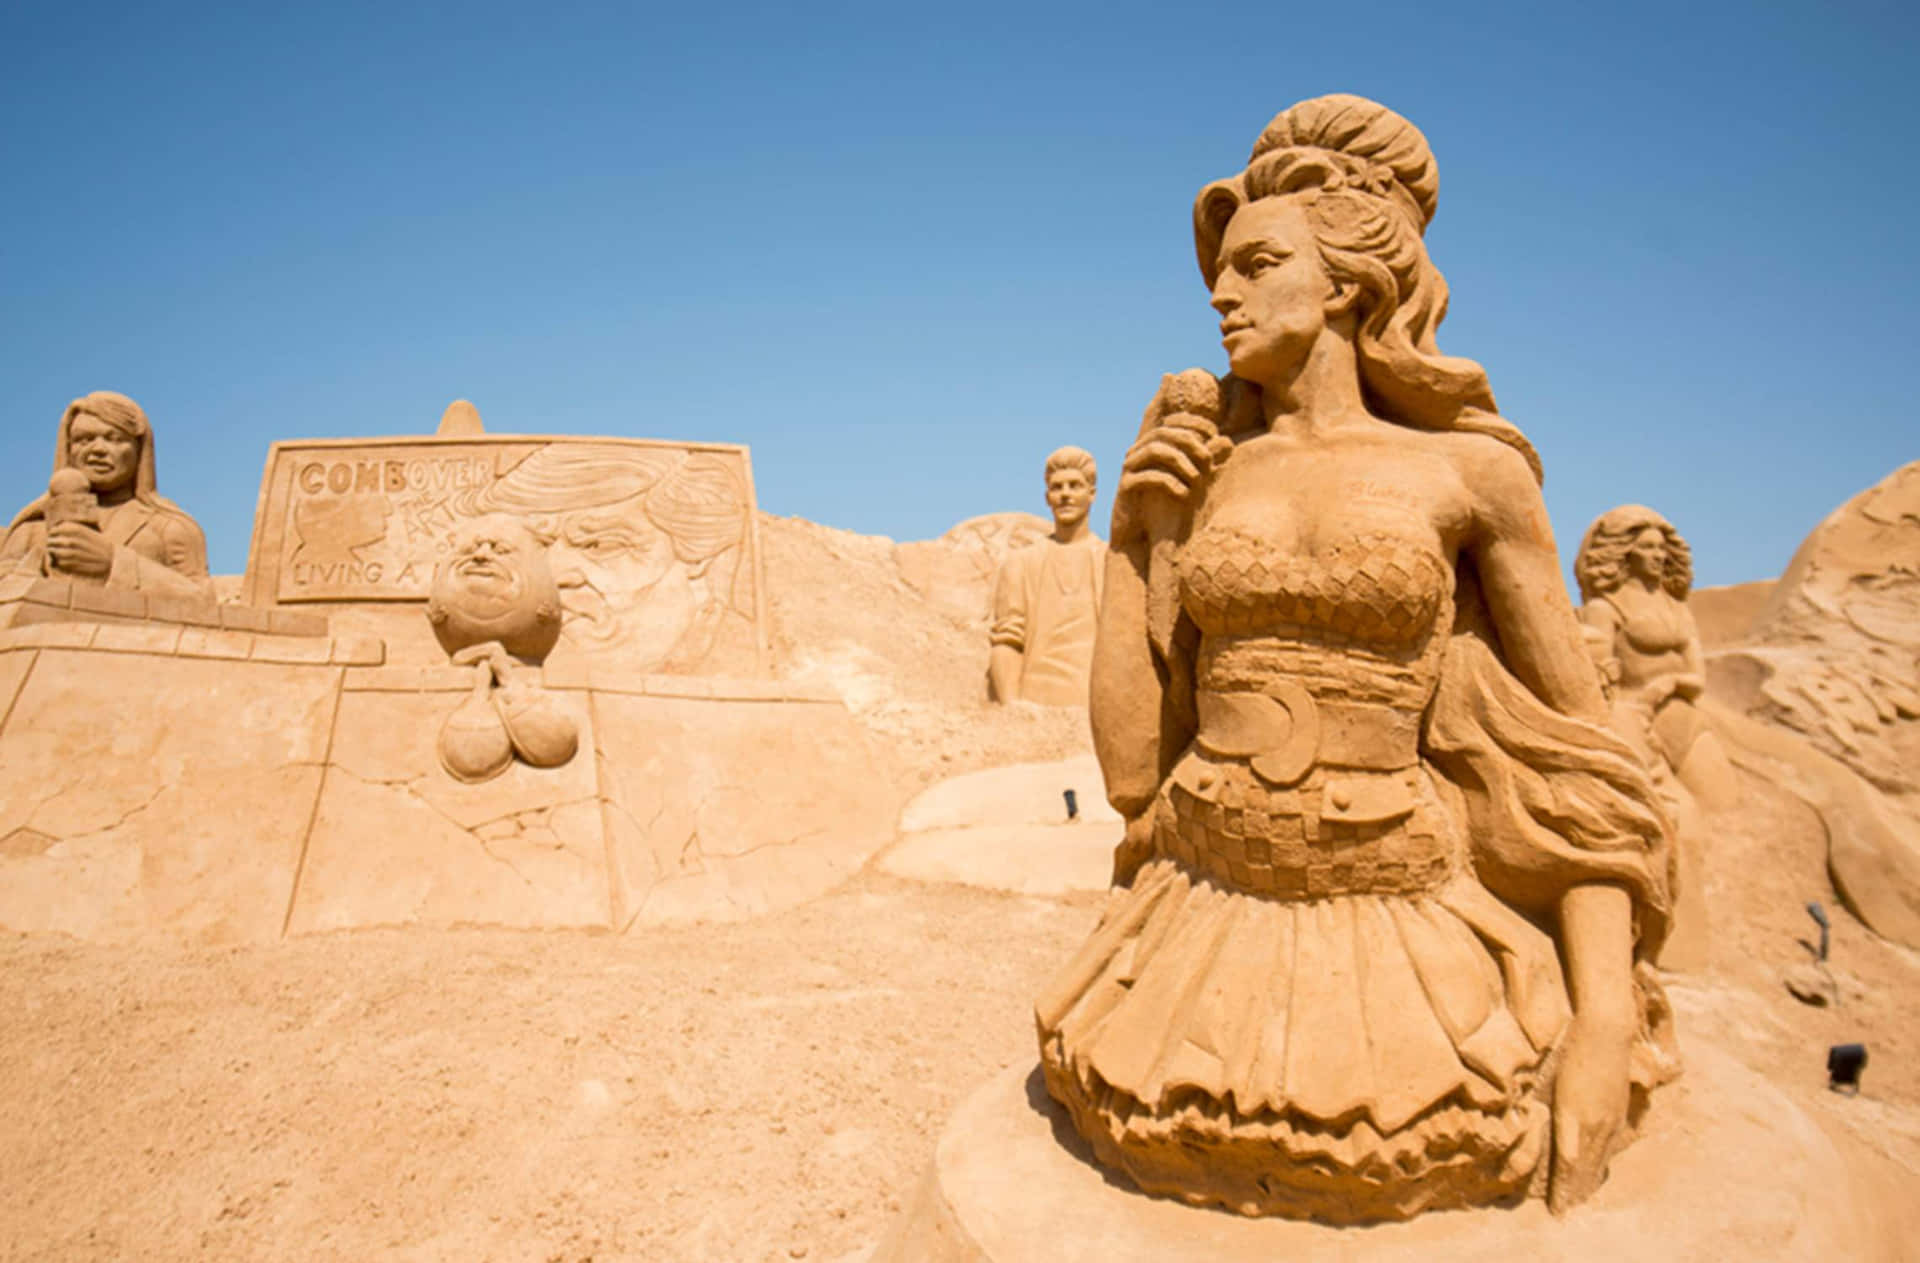 Sand Sculptures In The Desert With A Woman In A Dress